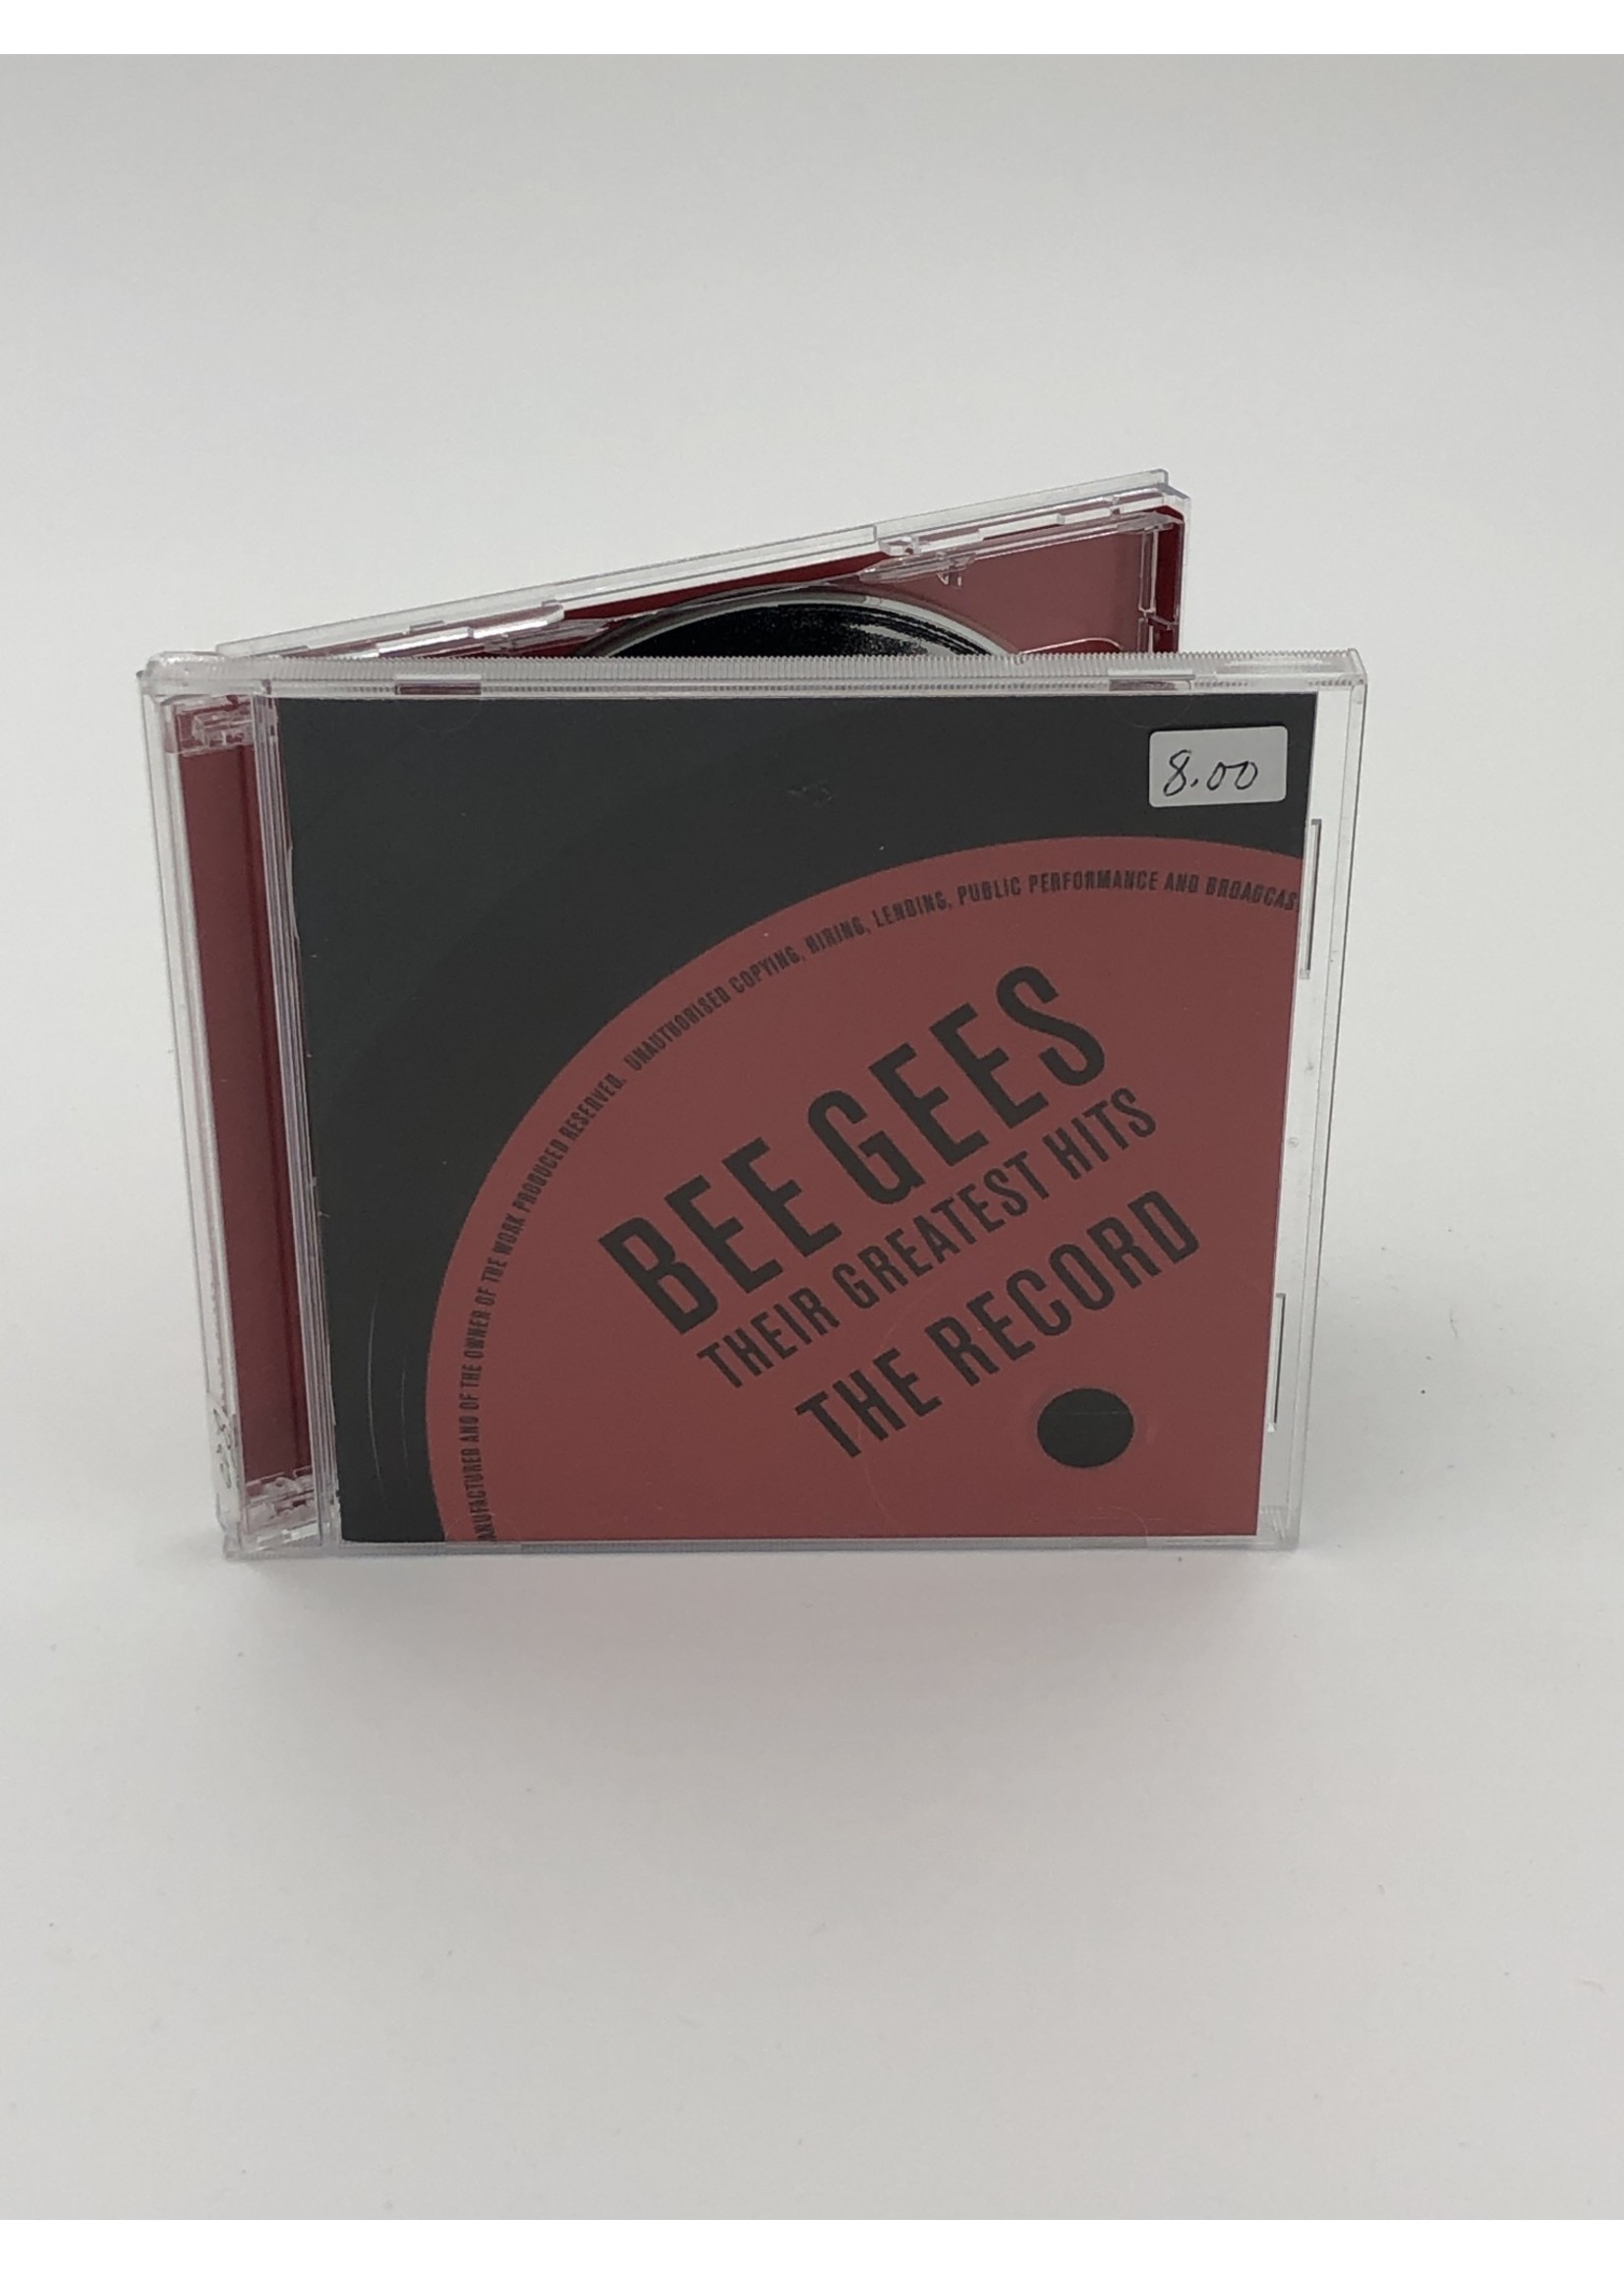 CD Their Greatest Hits Bee Gees The Record 2 CD